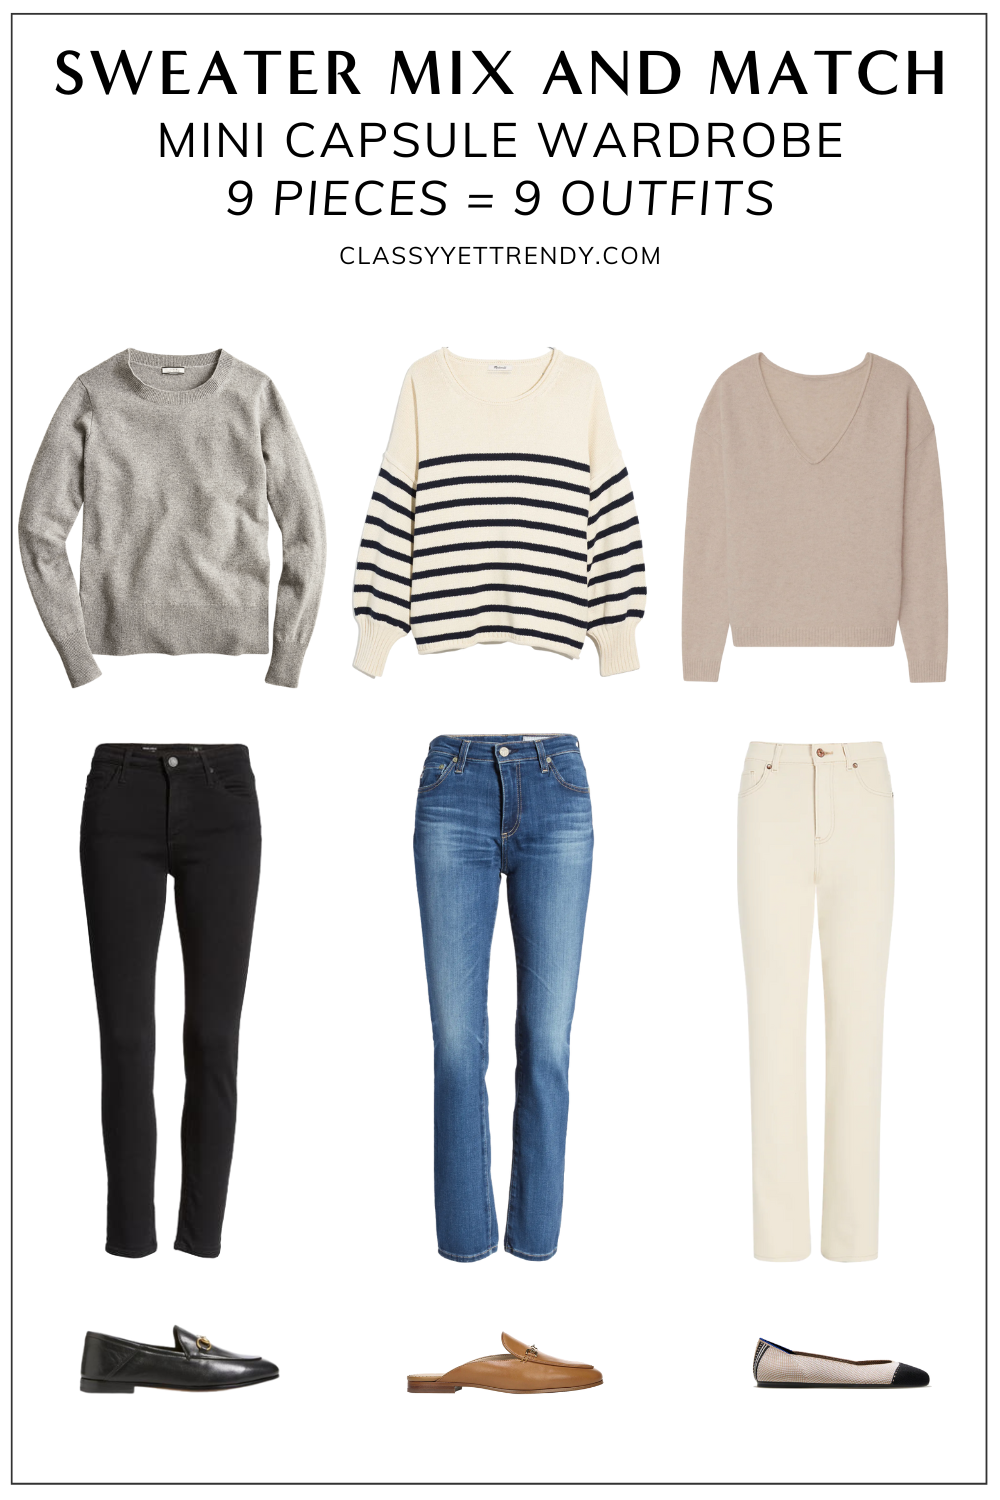 How To Style Sweaters In Your Fall And Winter Outfits - Classy Yet Trendy